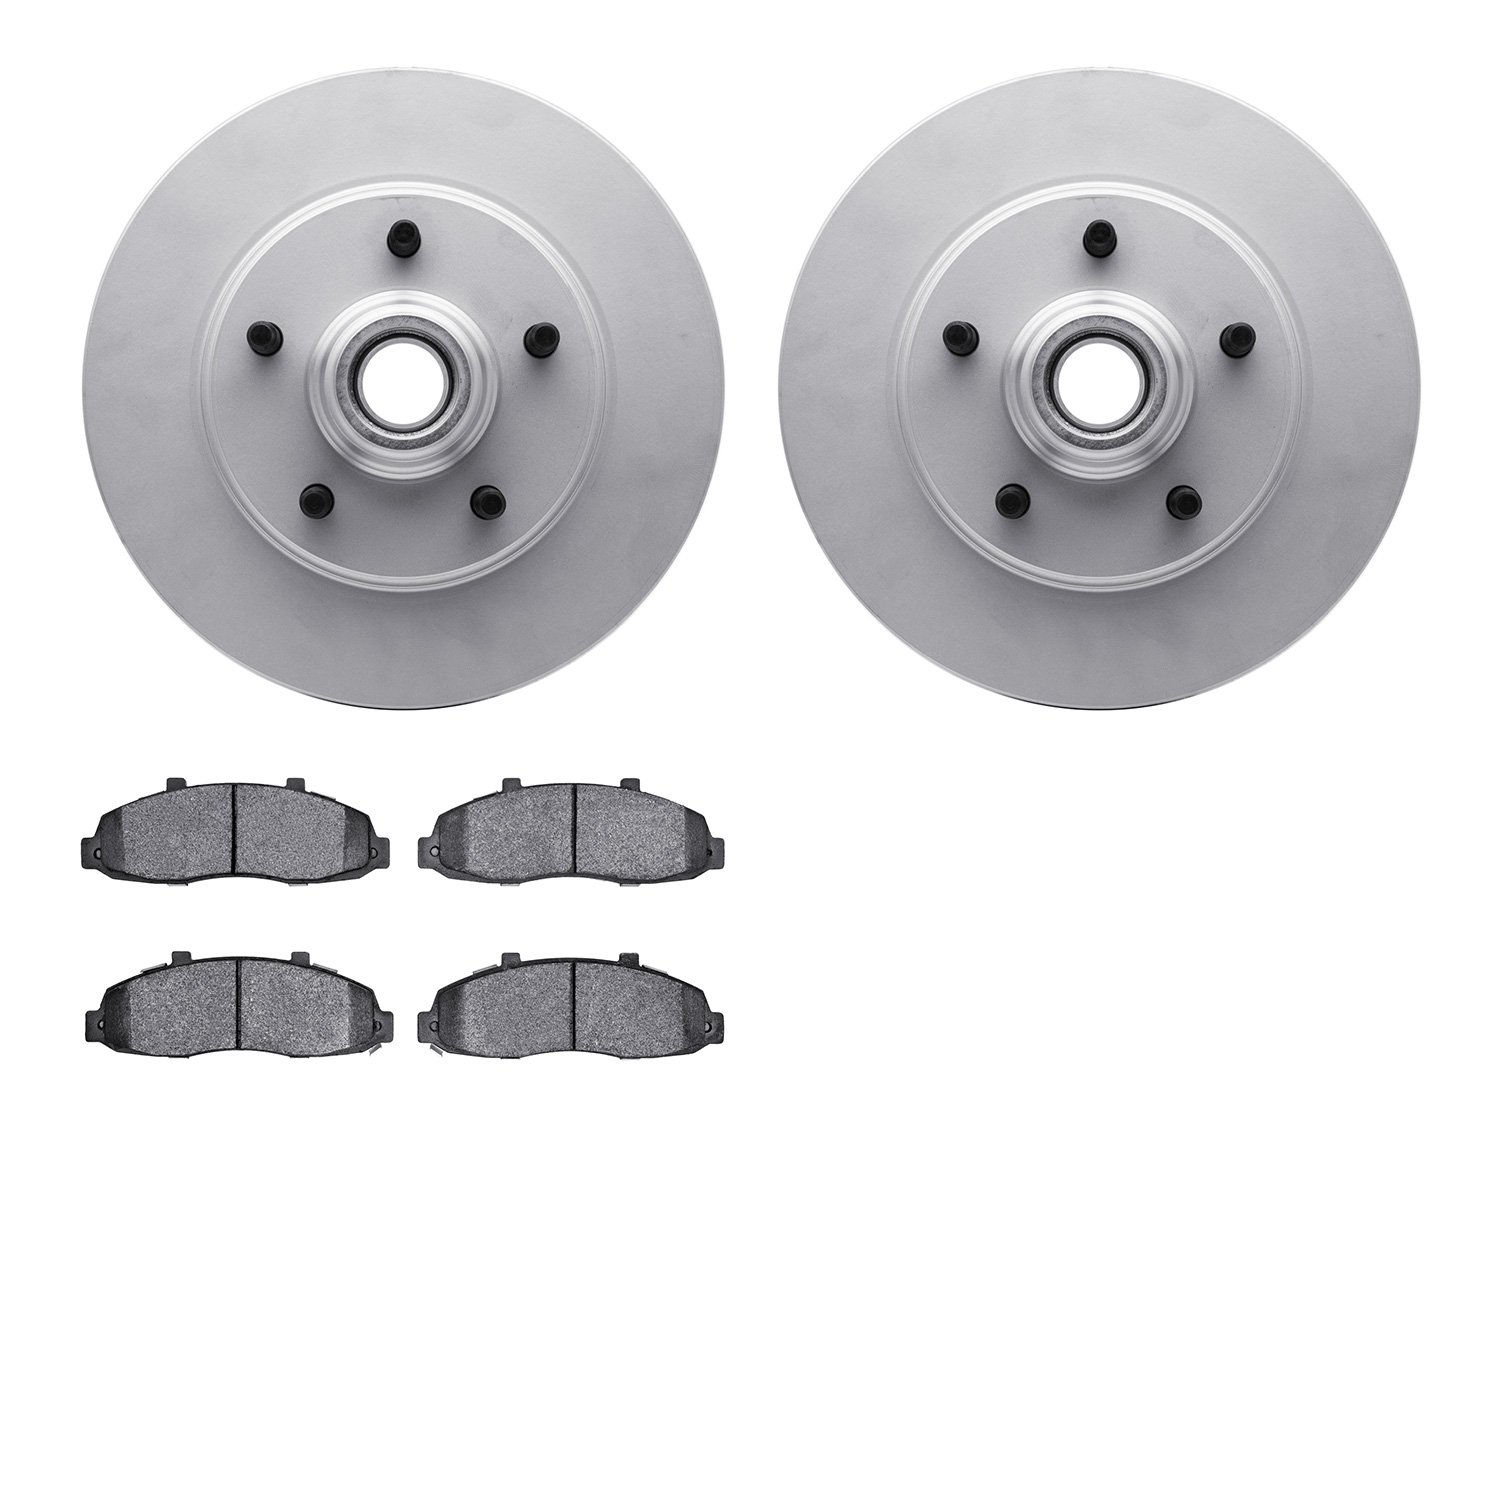 4402-54031 Geospec Brake Rotors with Ultimate-Duty Brake Pads Kit, 2000-2004 Ford/Lincoln/Mercury/Mazda, Position: Front